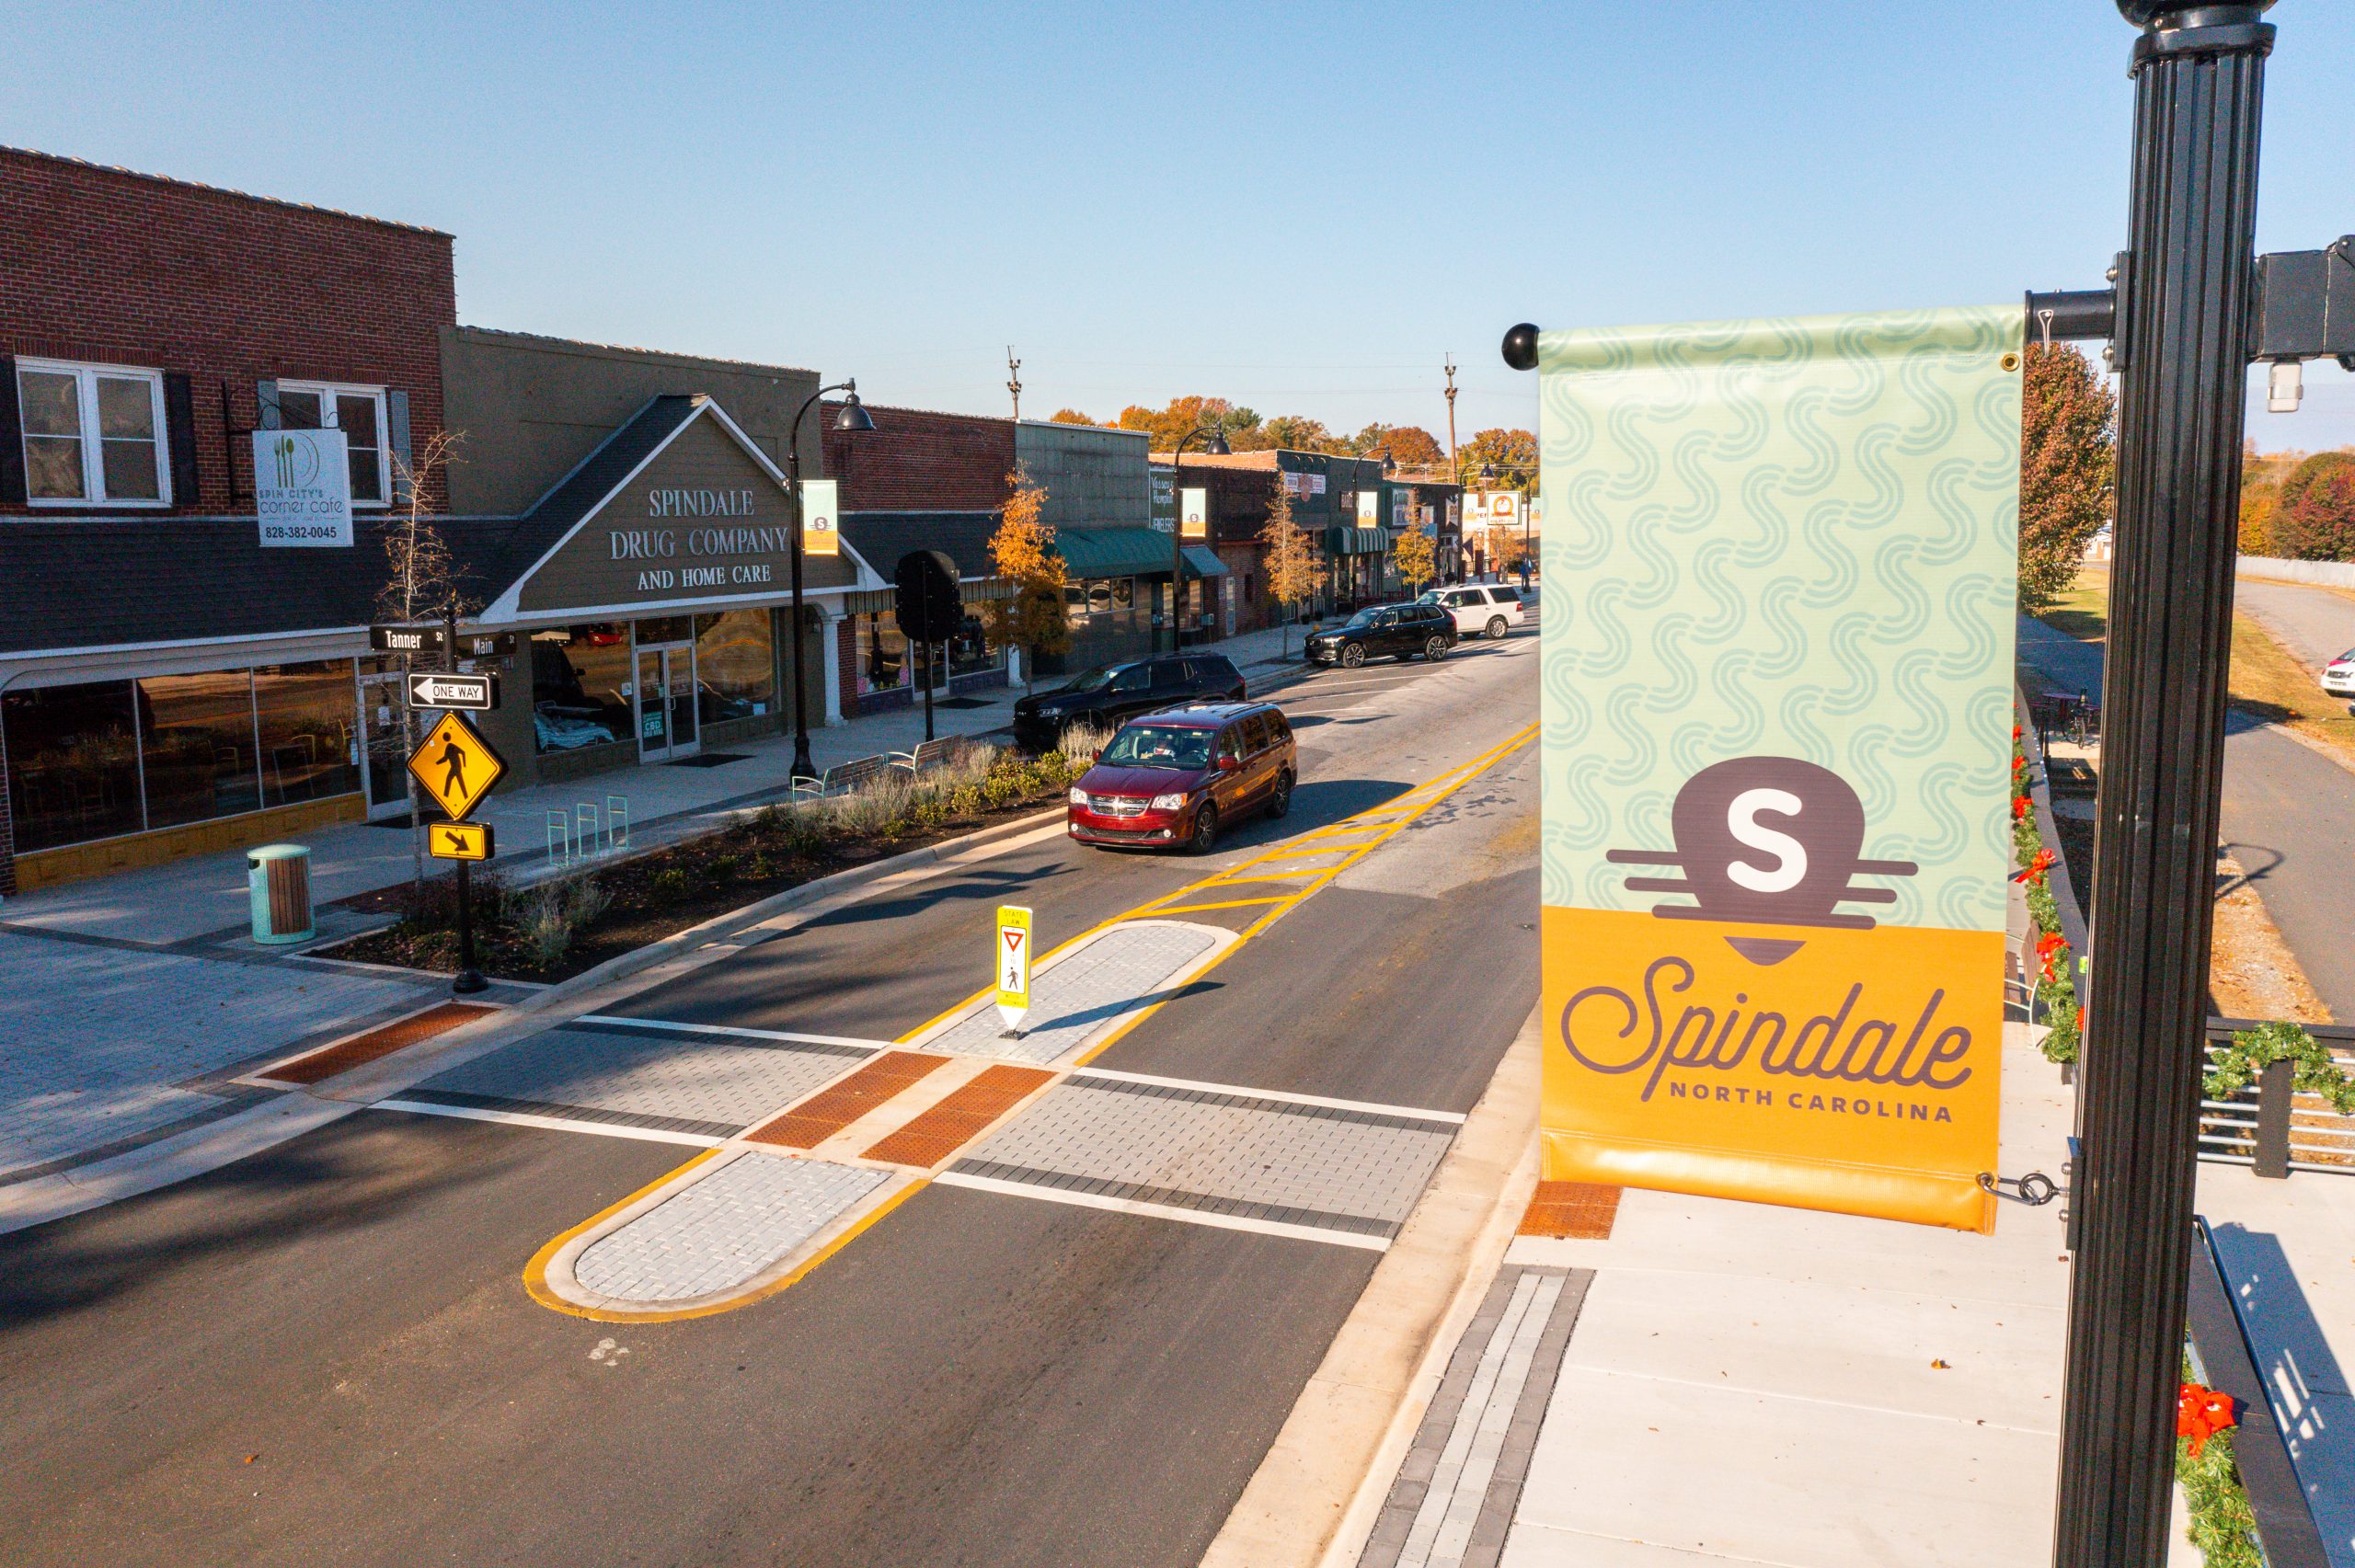 A yellow and green banner featuring the Spindale brand flies above the newly widened street in Spindale